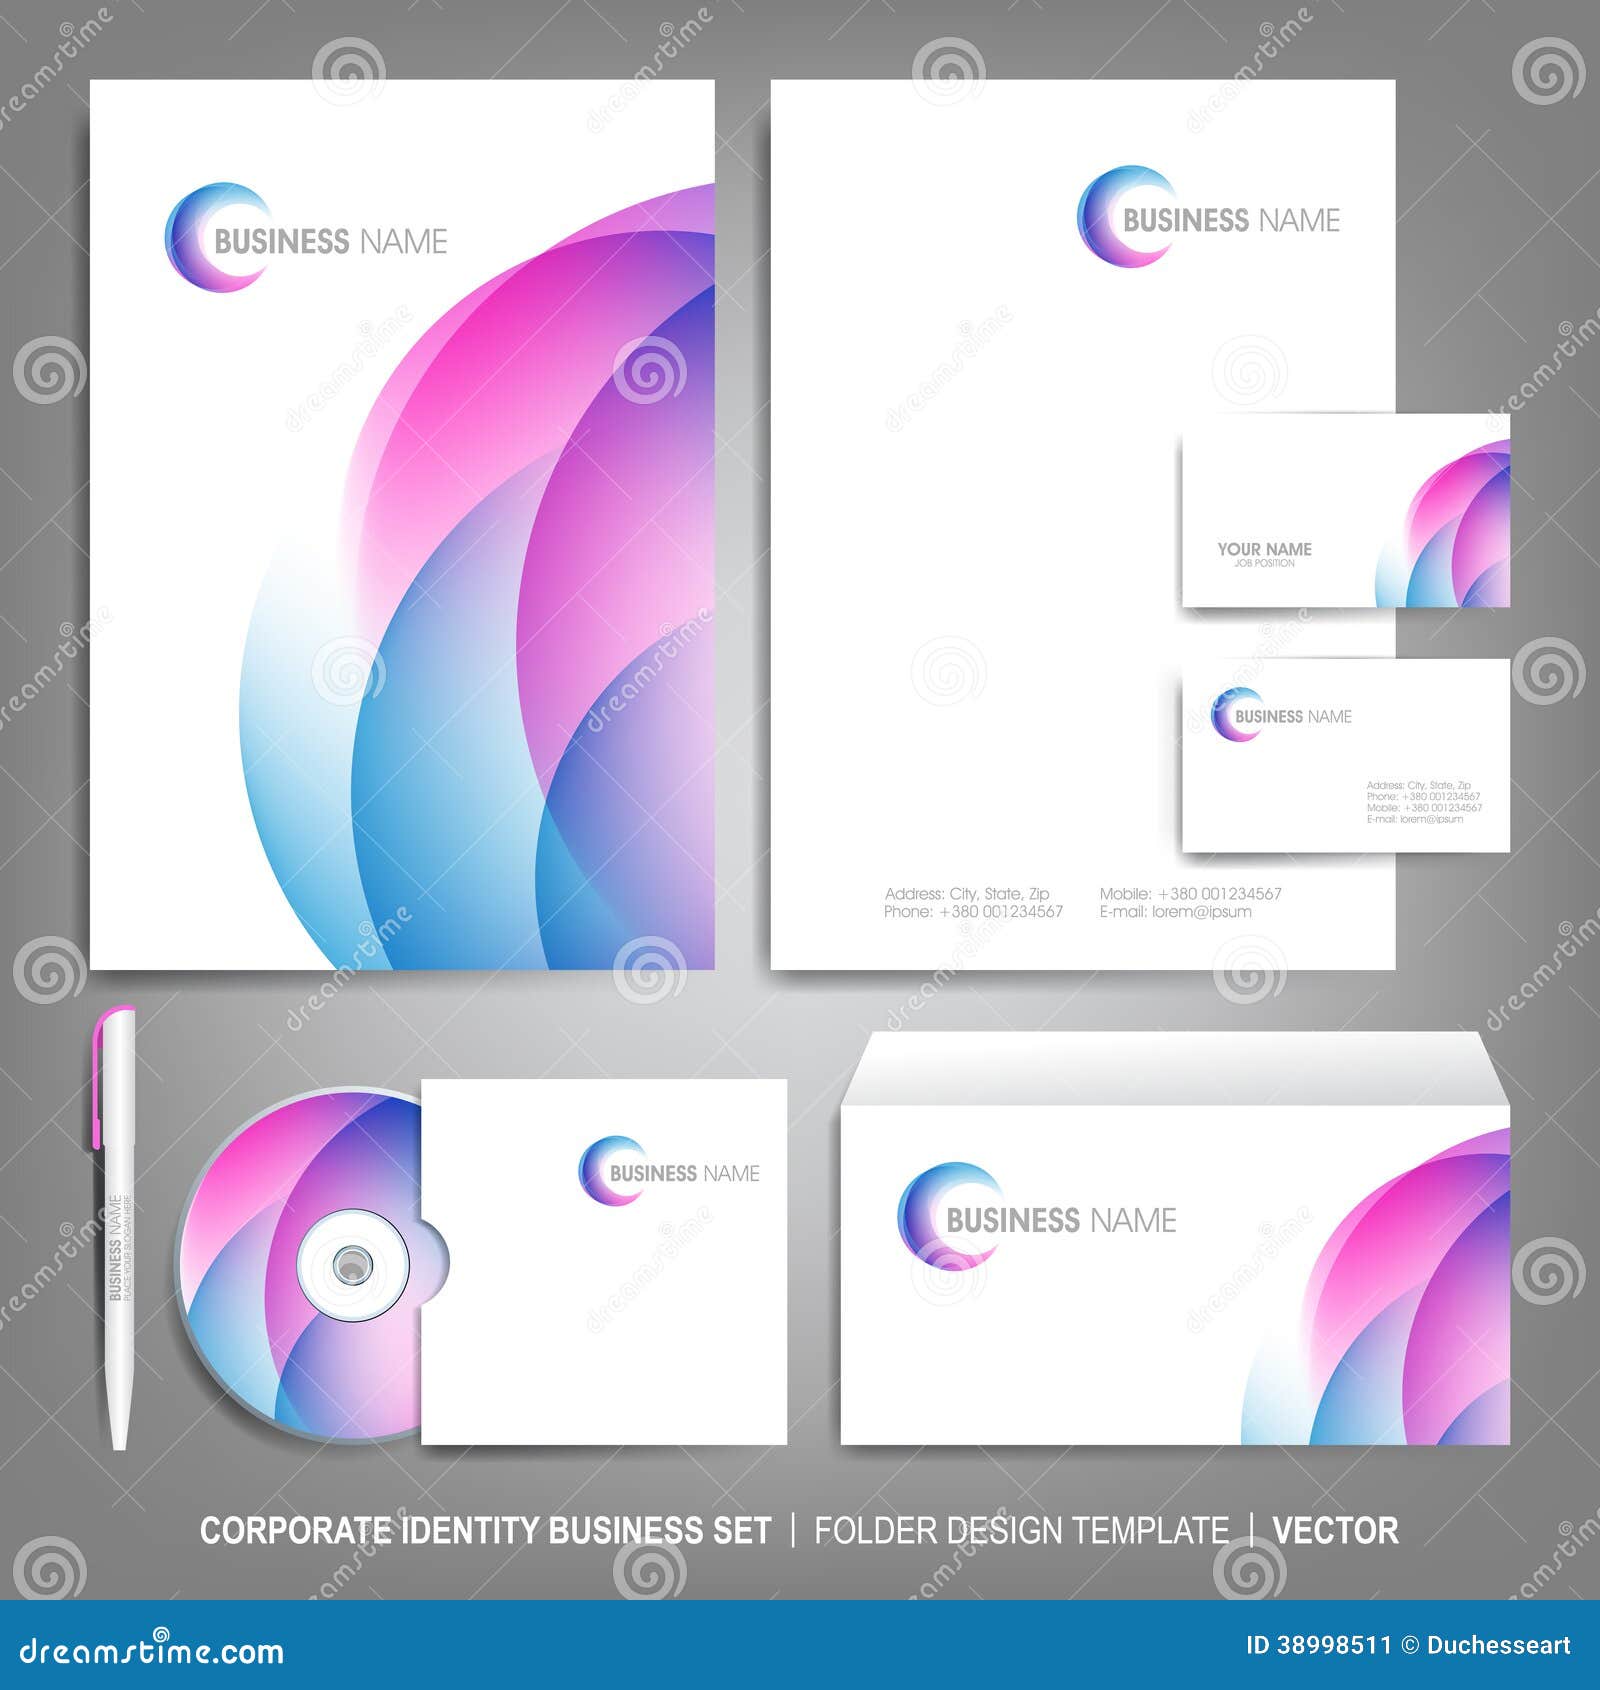 corporate identity template for business artworks